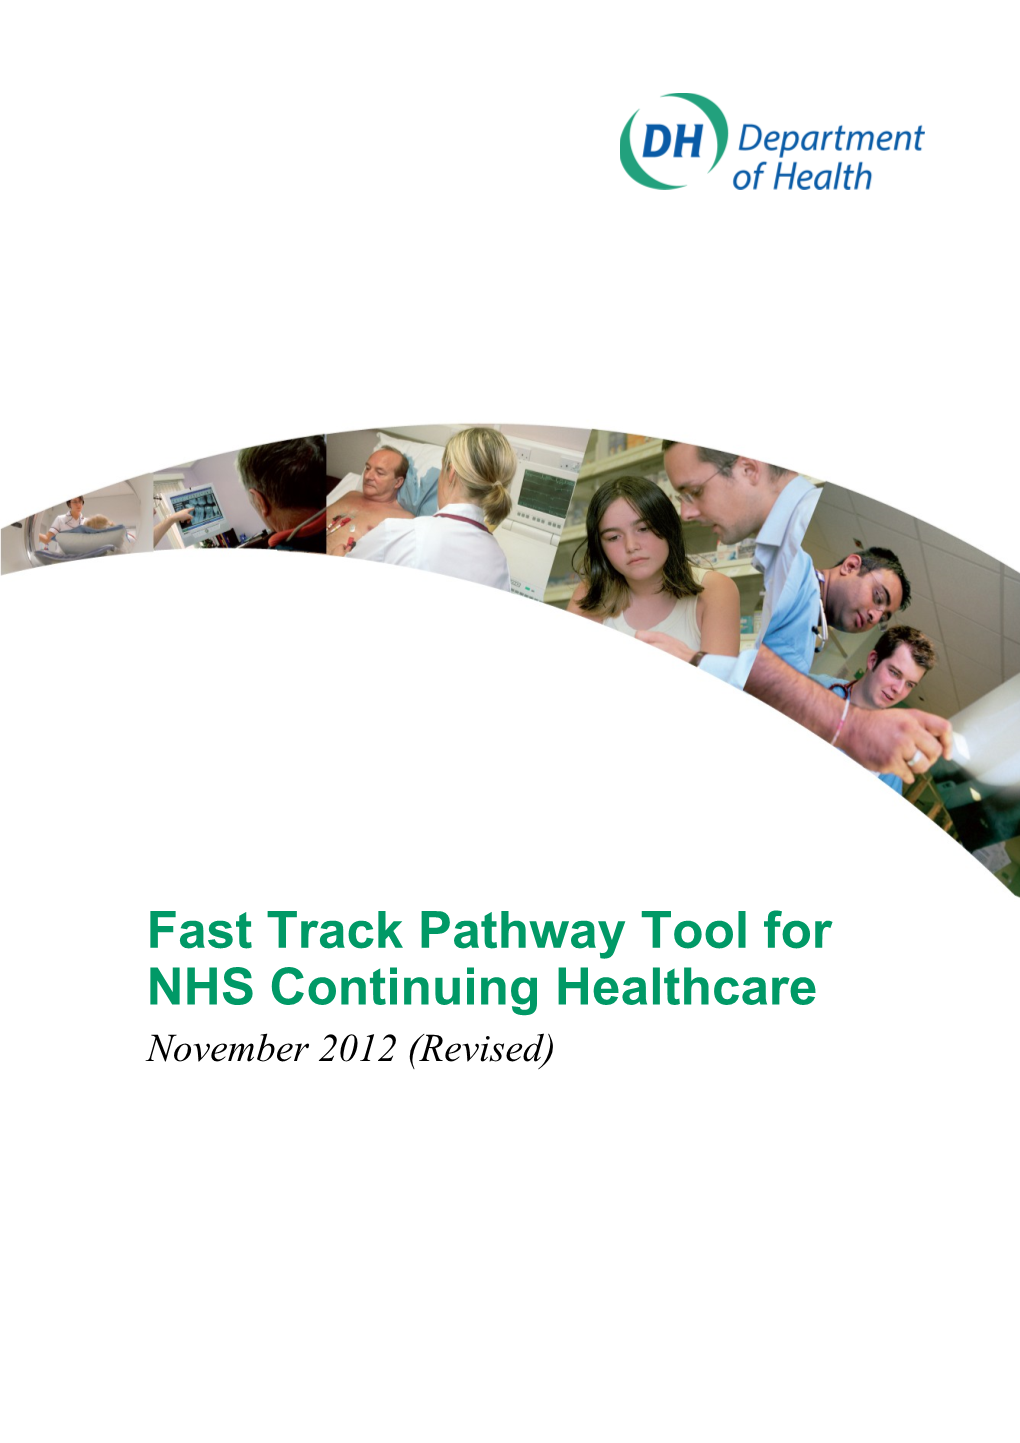 Fast Track Pathway Tool for NHS